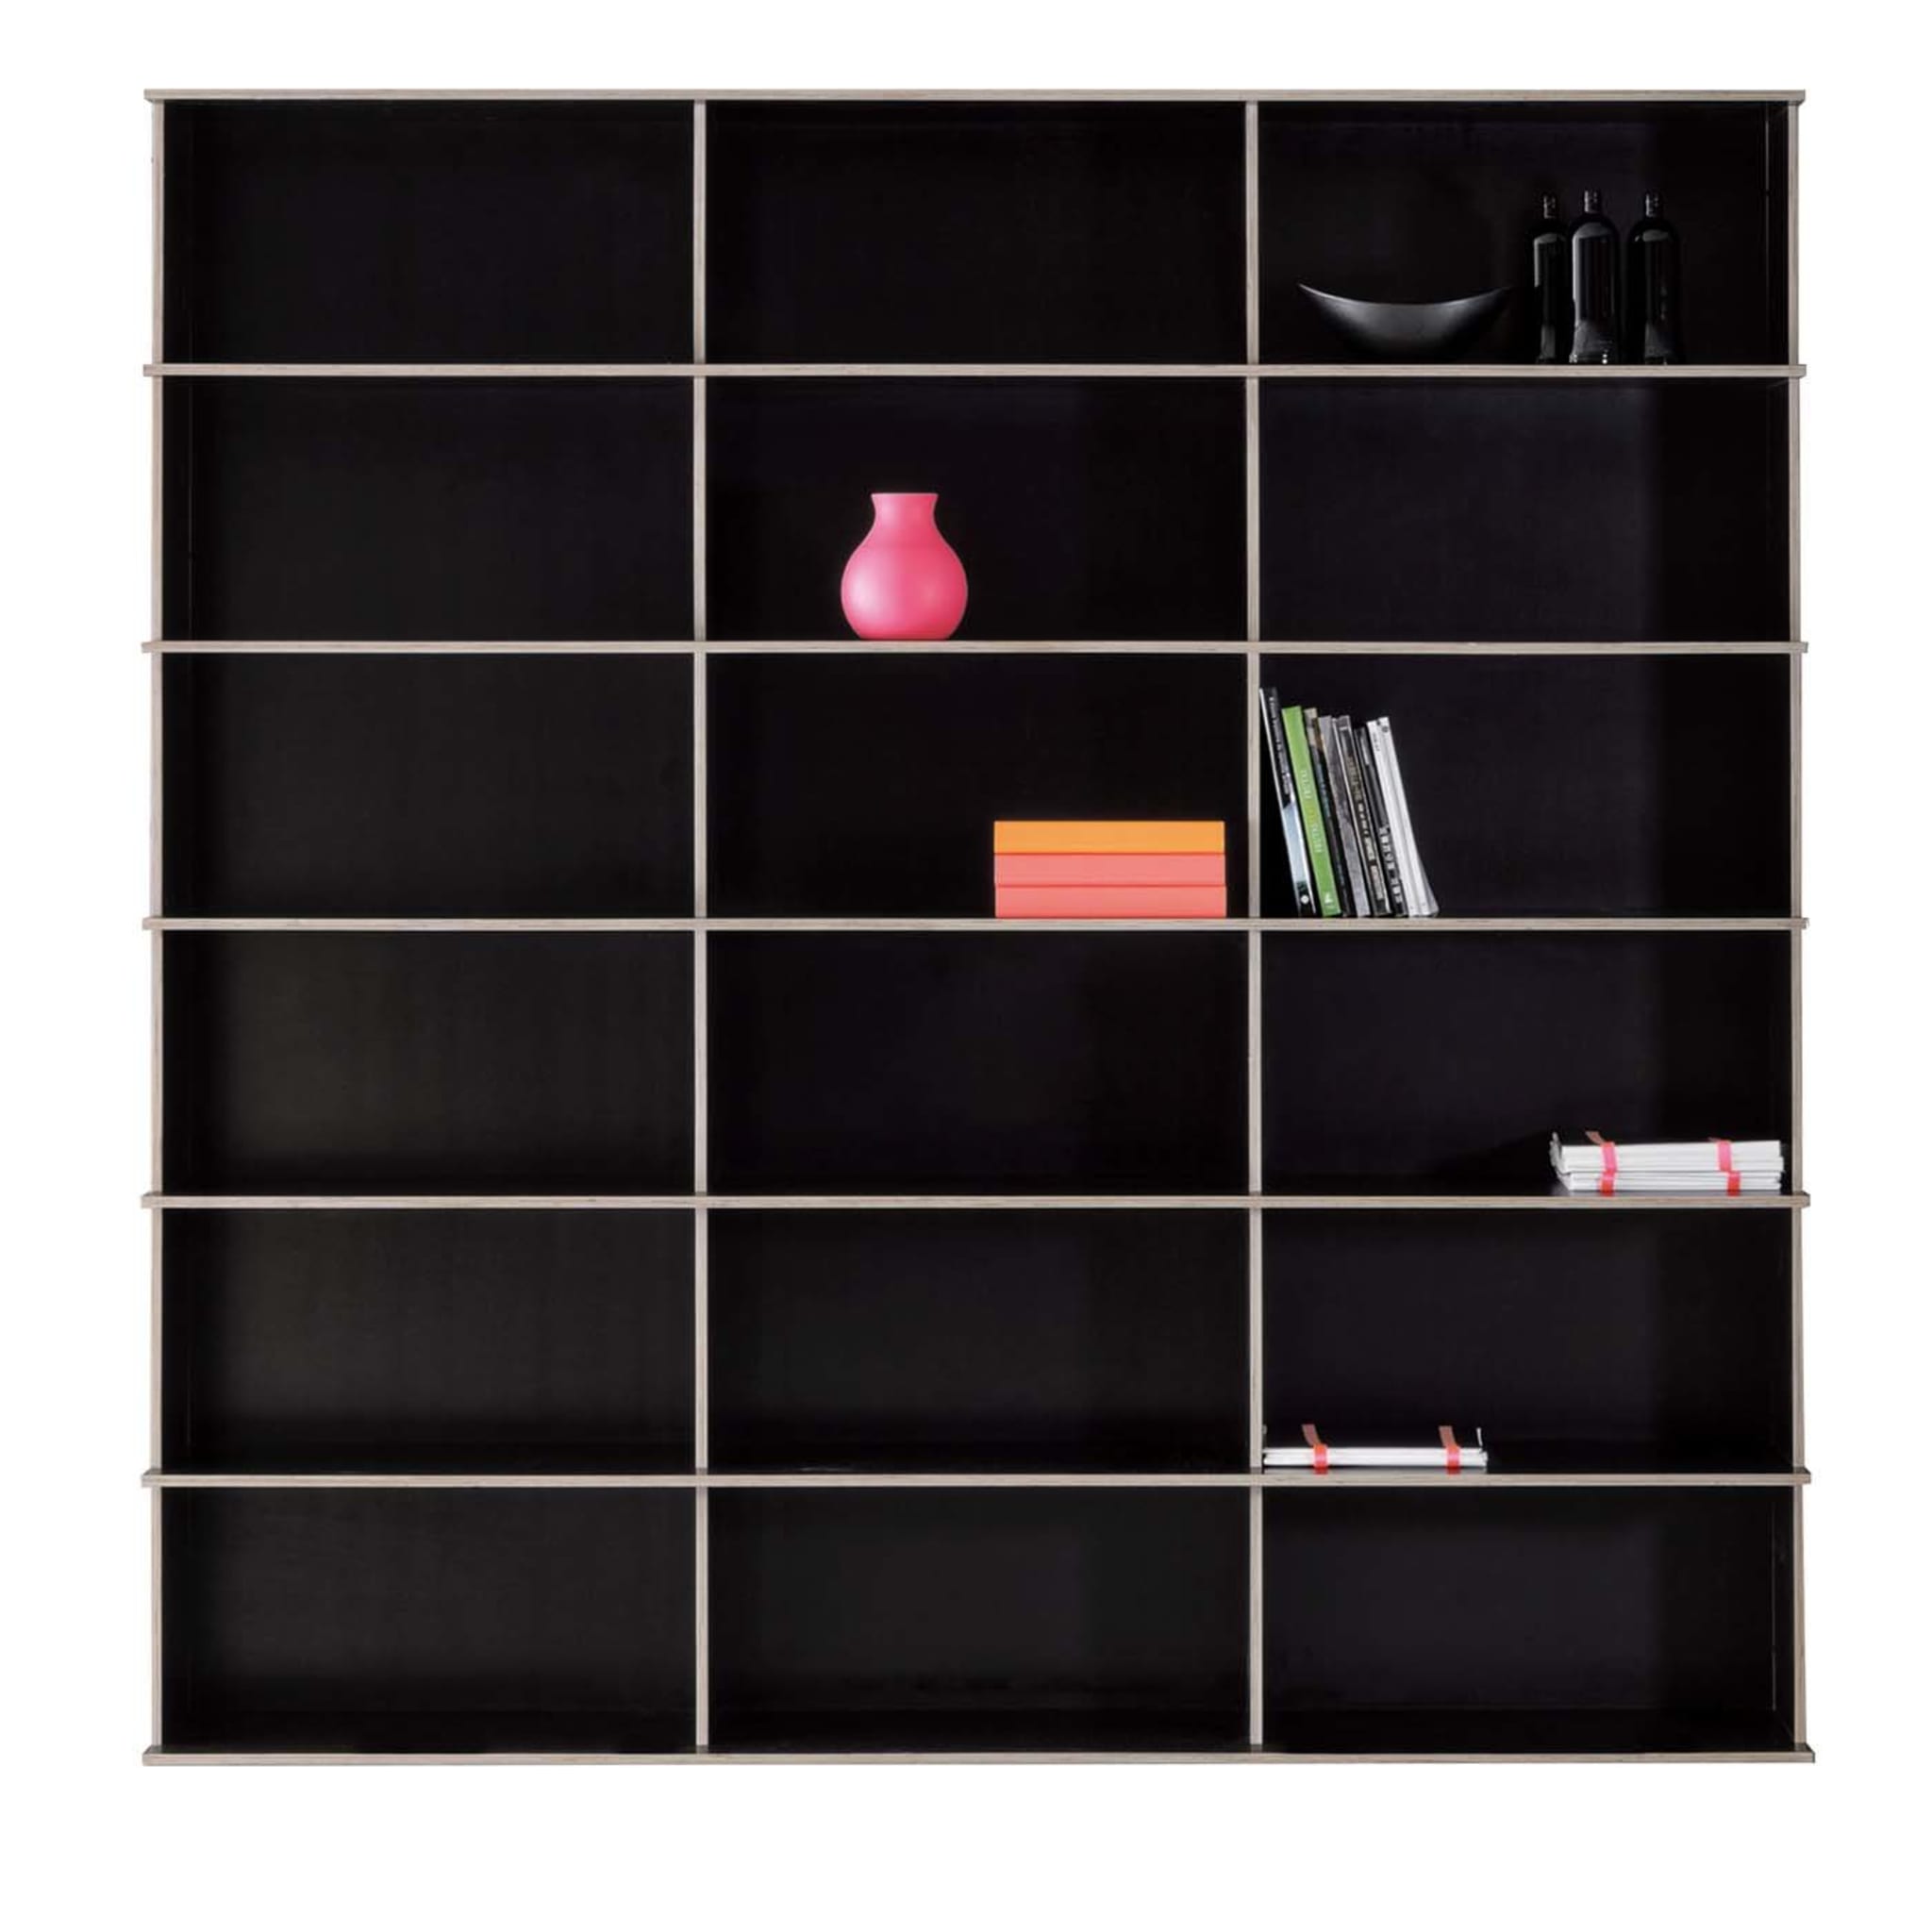 J.M.B./3.6 Bookcase by CCRZ - Main view